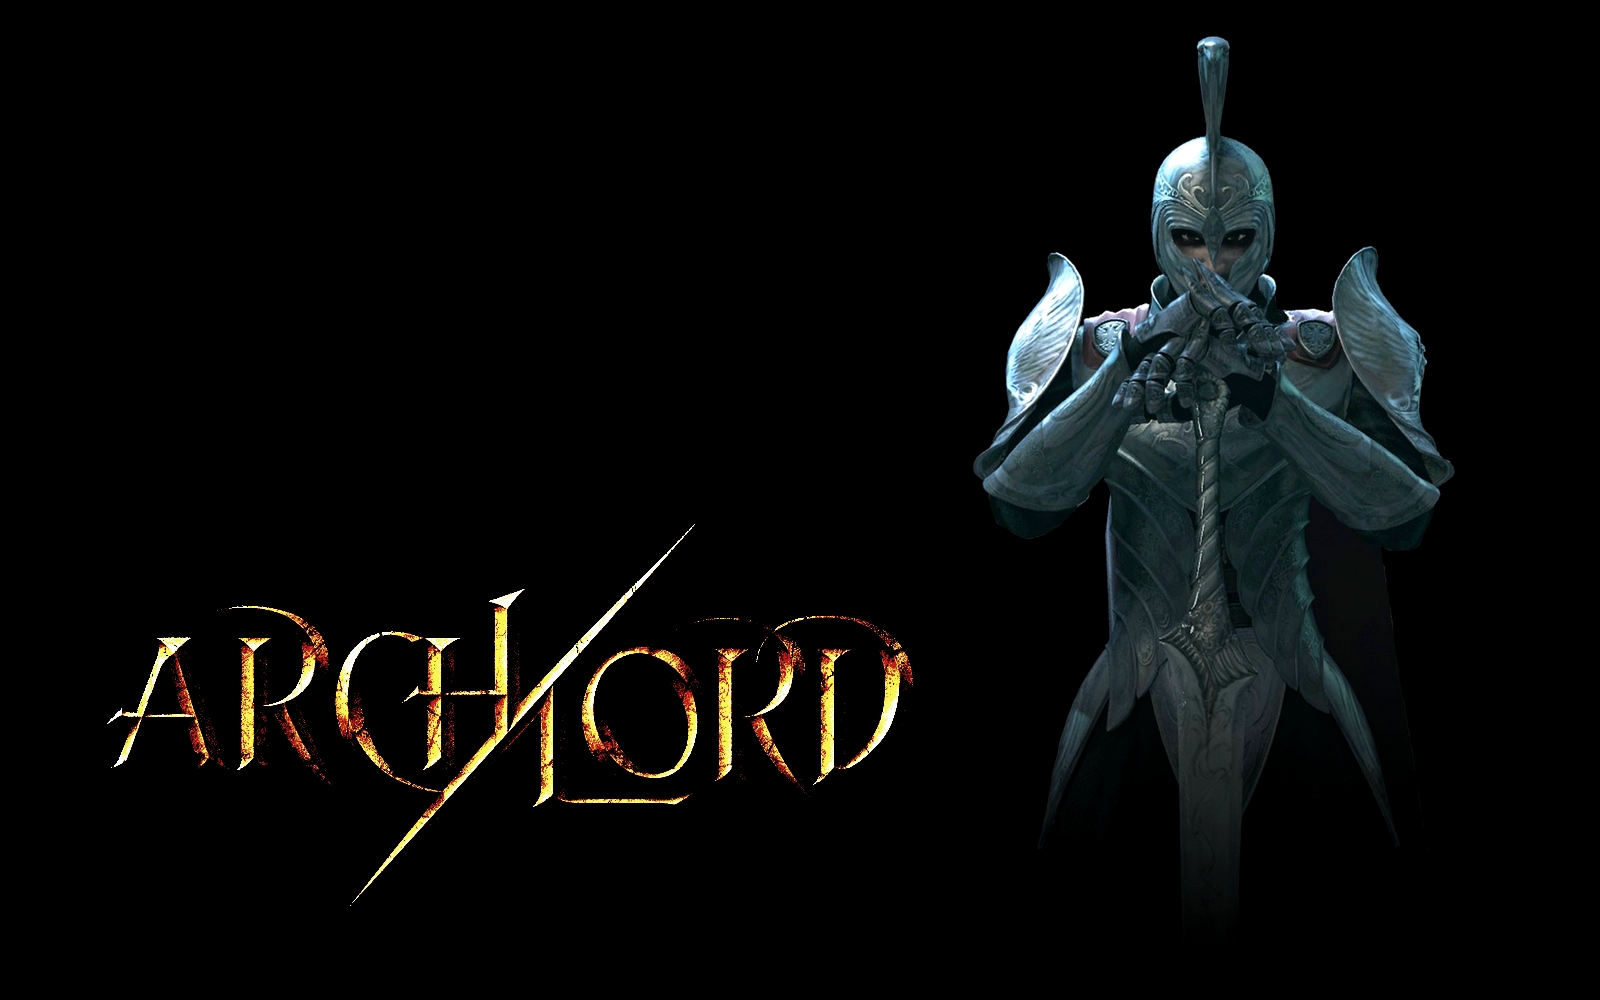 Best Archlord Wallpaper